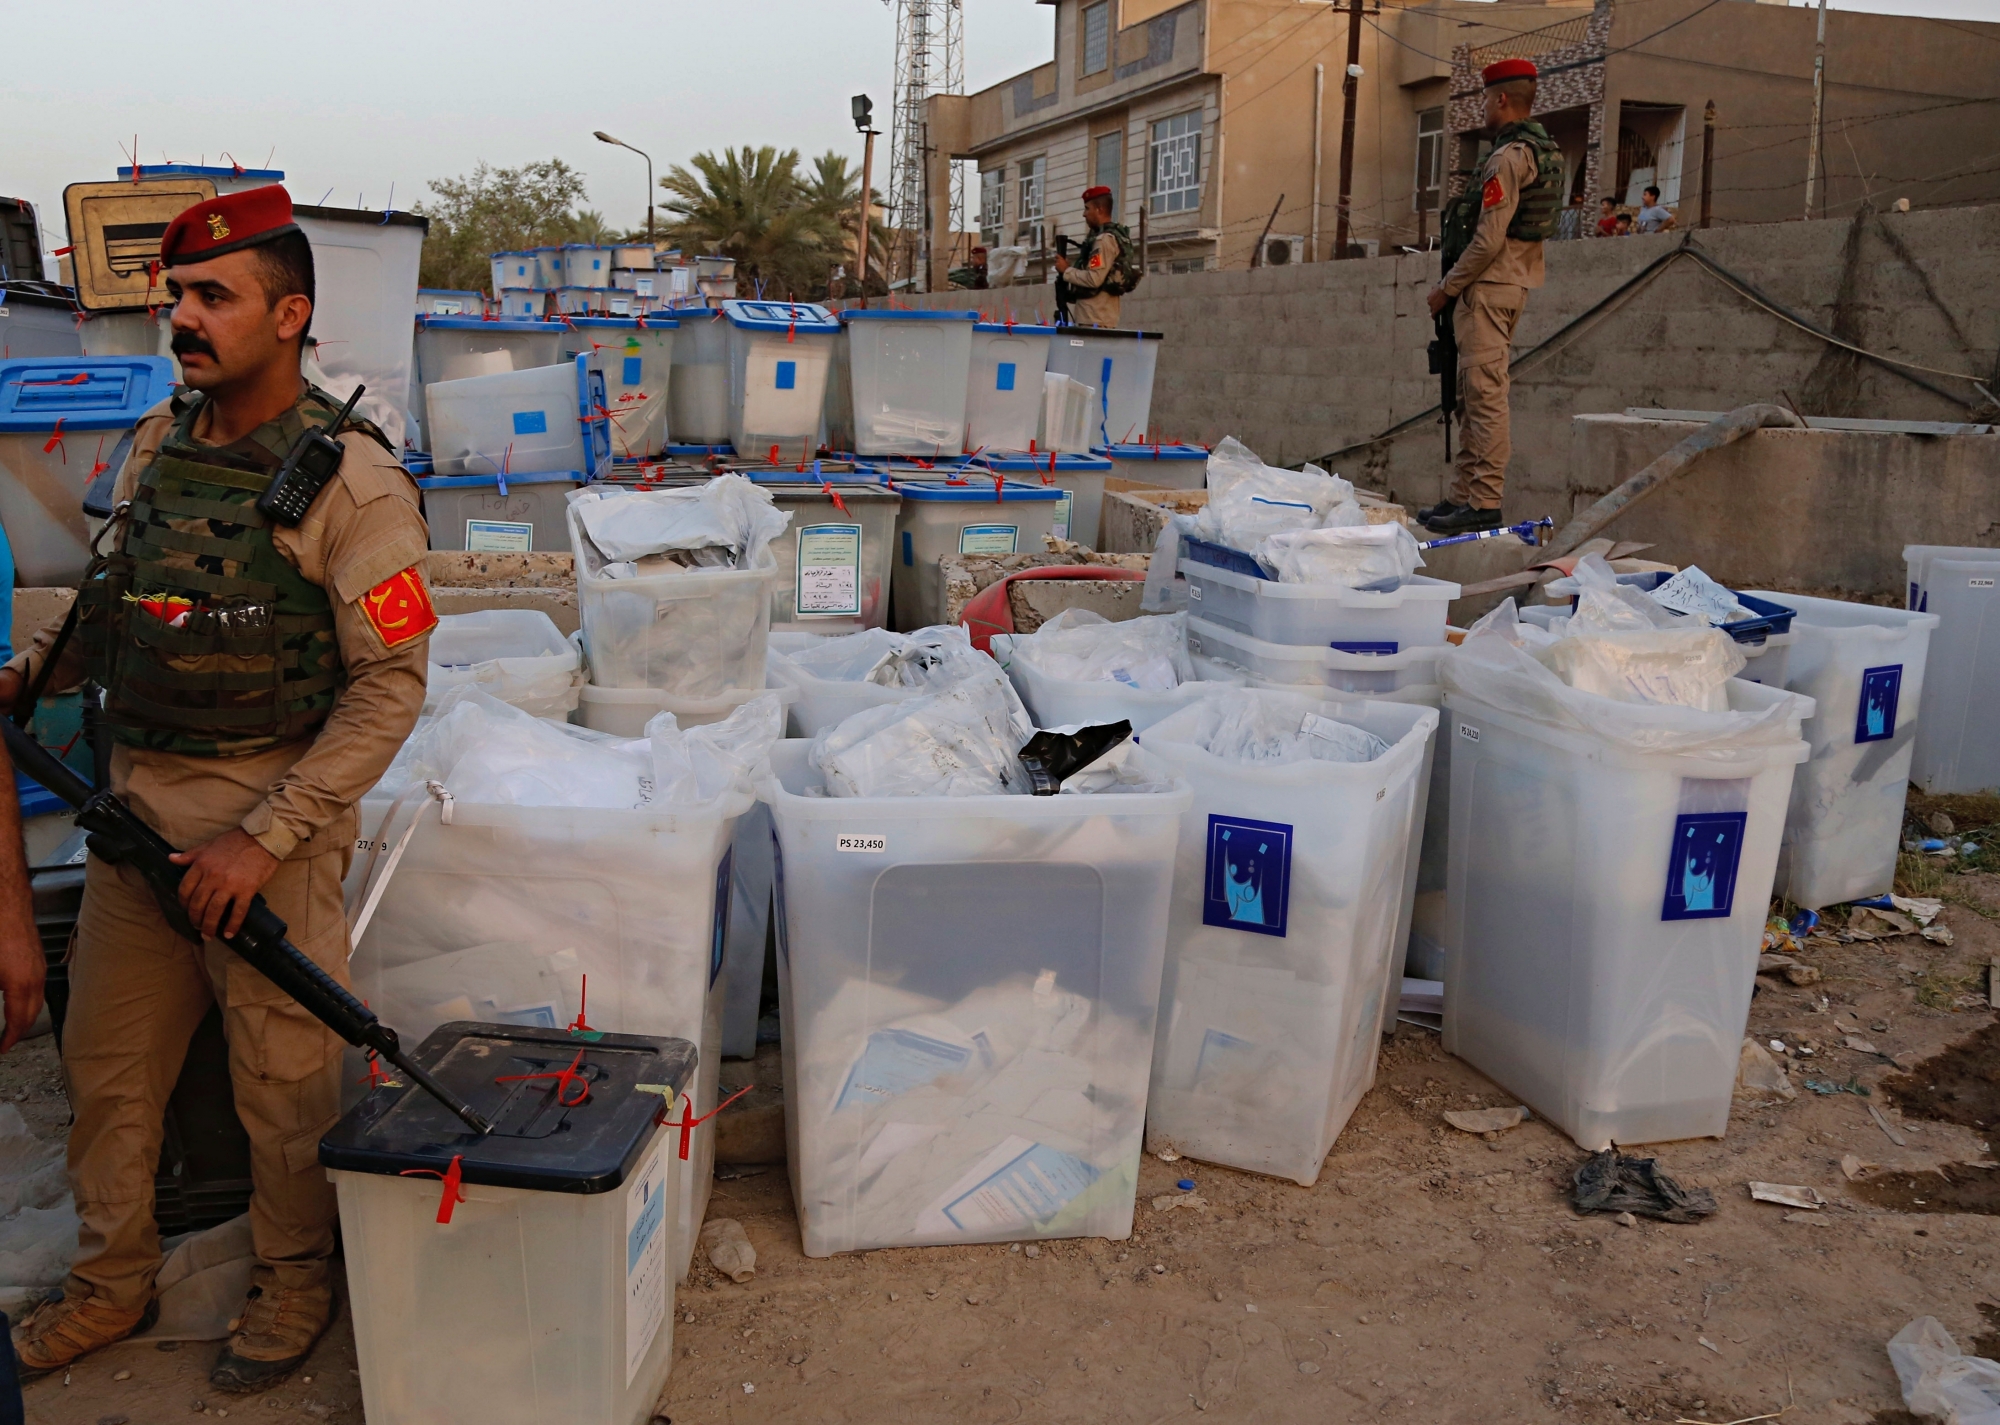 Iraqi security forces guard ballot boxes after a fire that broke out at Baghdad's largest ballot box storage site, where ballots from Iraq's May parliamentary elections are stored, in Baghdad, Iraq, Sunday, June 10, 2018. The ballots are part of a manual recount of votes, mandated in a law passed by the Iraqi parliament last Wednesday. (AP Photo/Karim Kadim) Iraq Fire